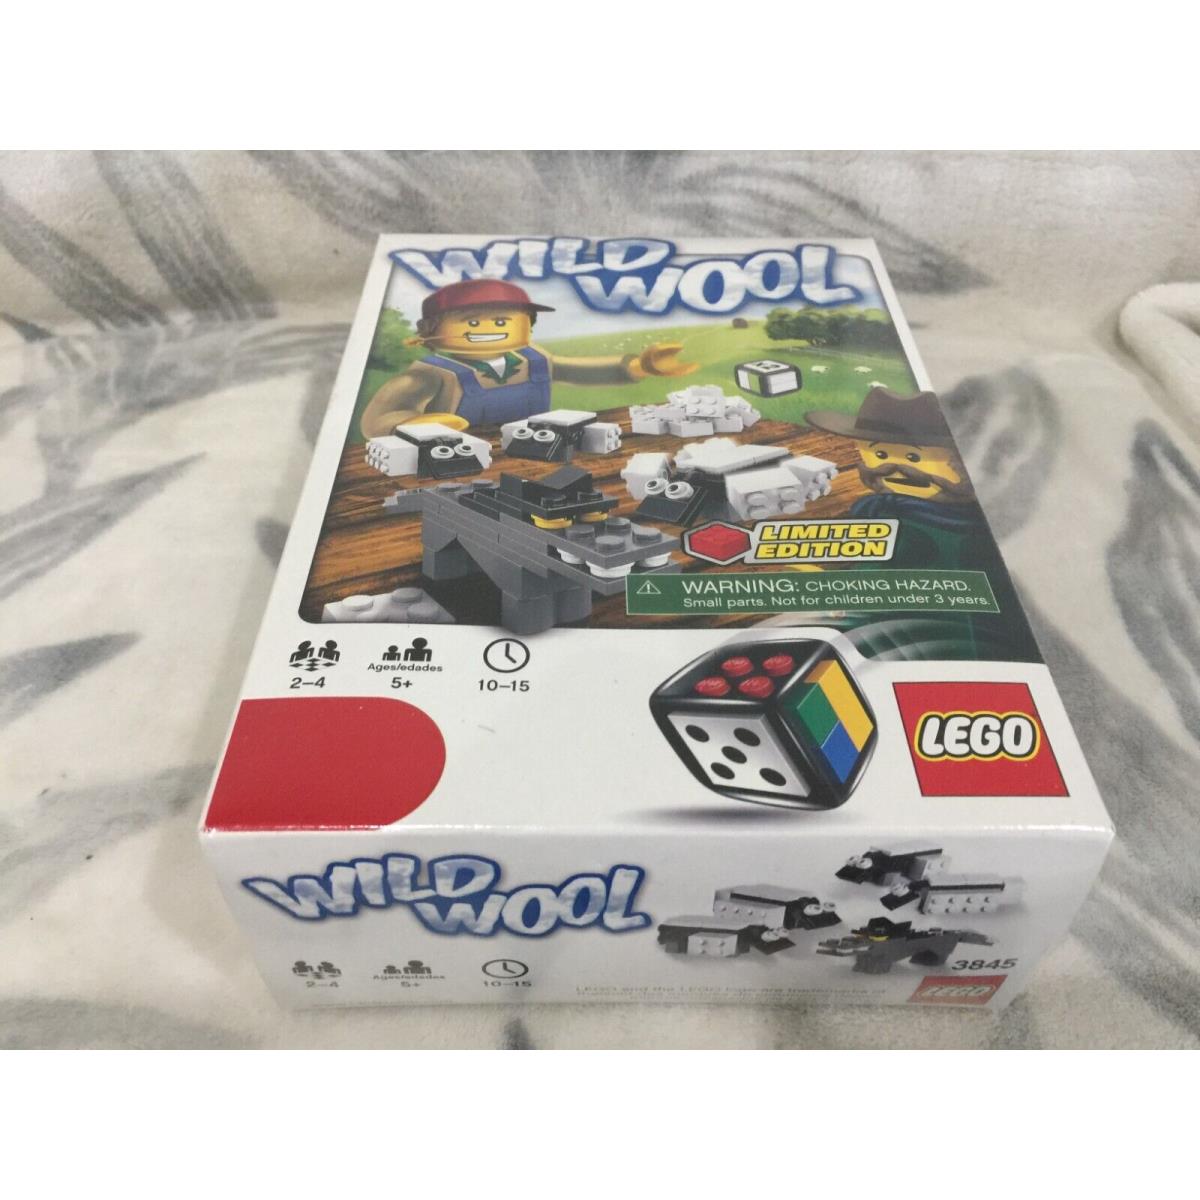 Lego Games Board Game Wild Wool Limited Edition 3845